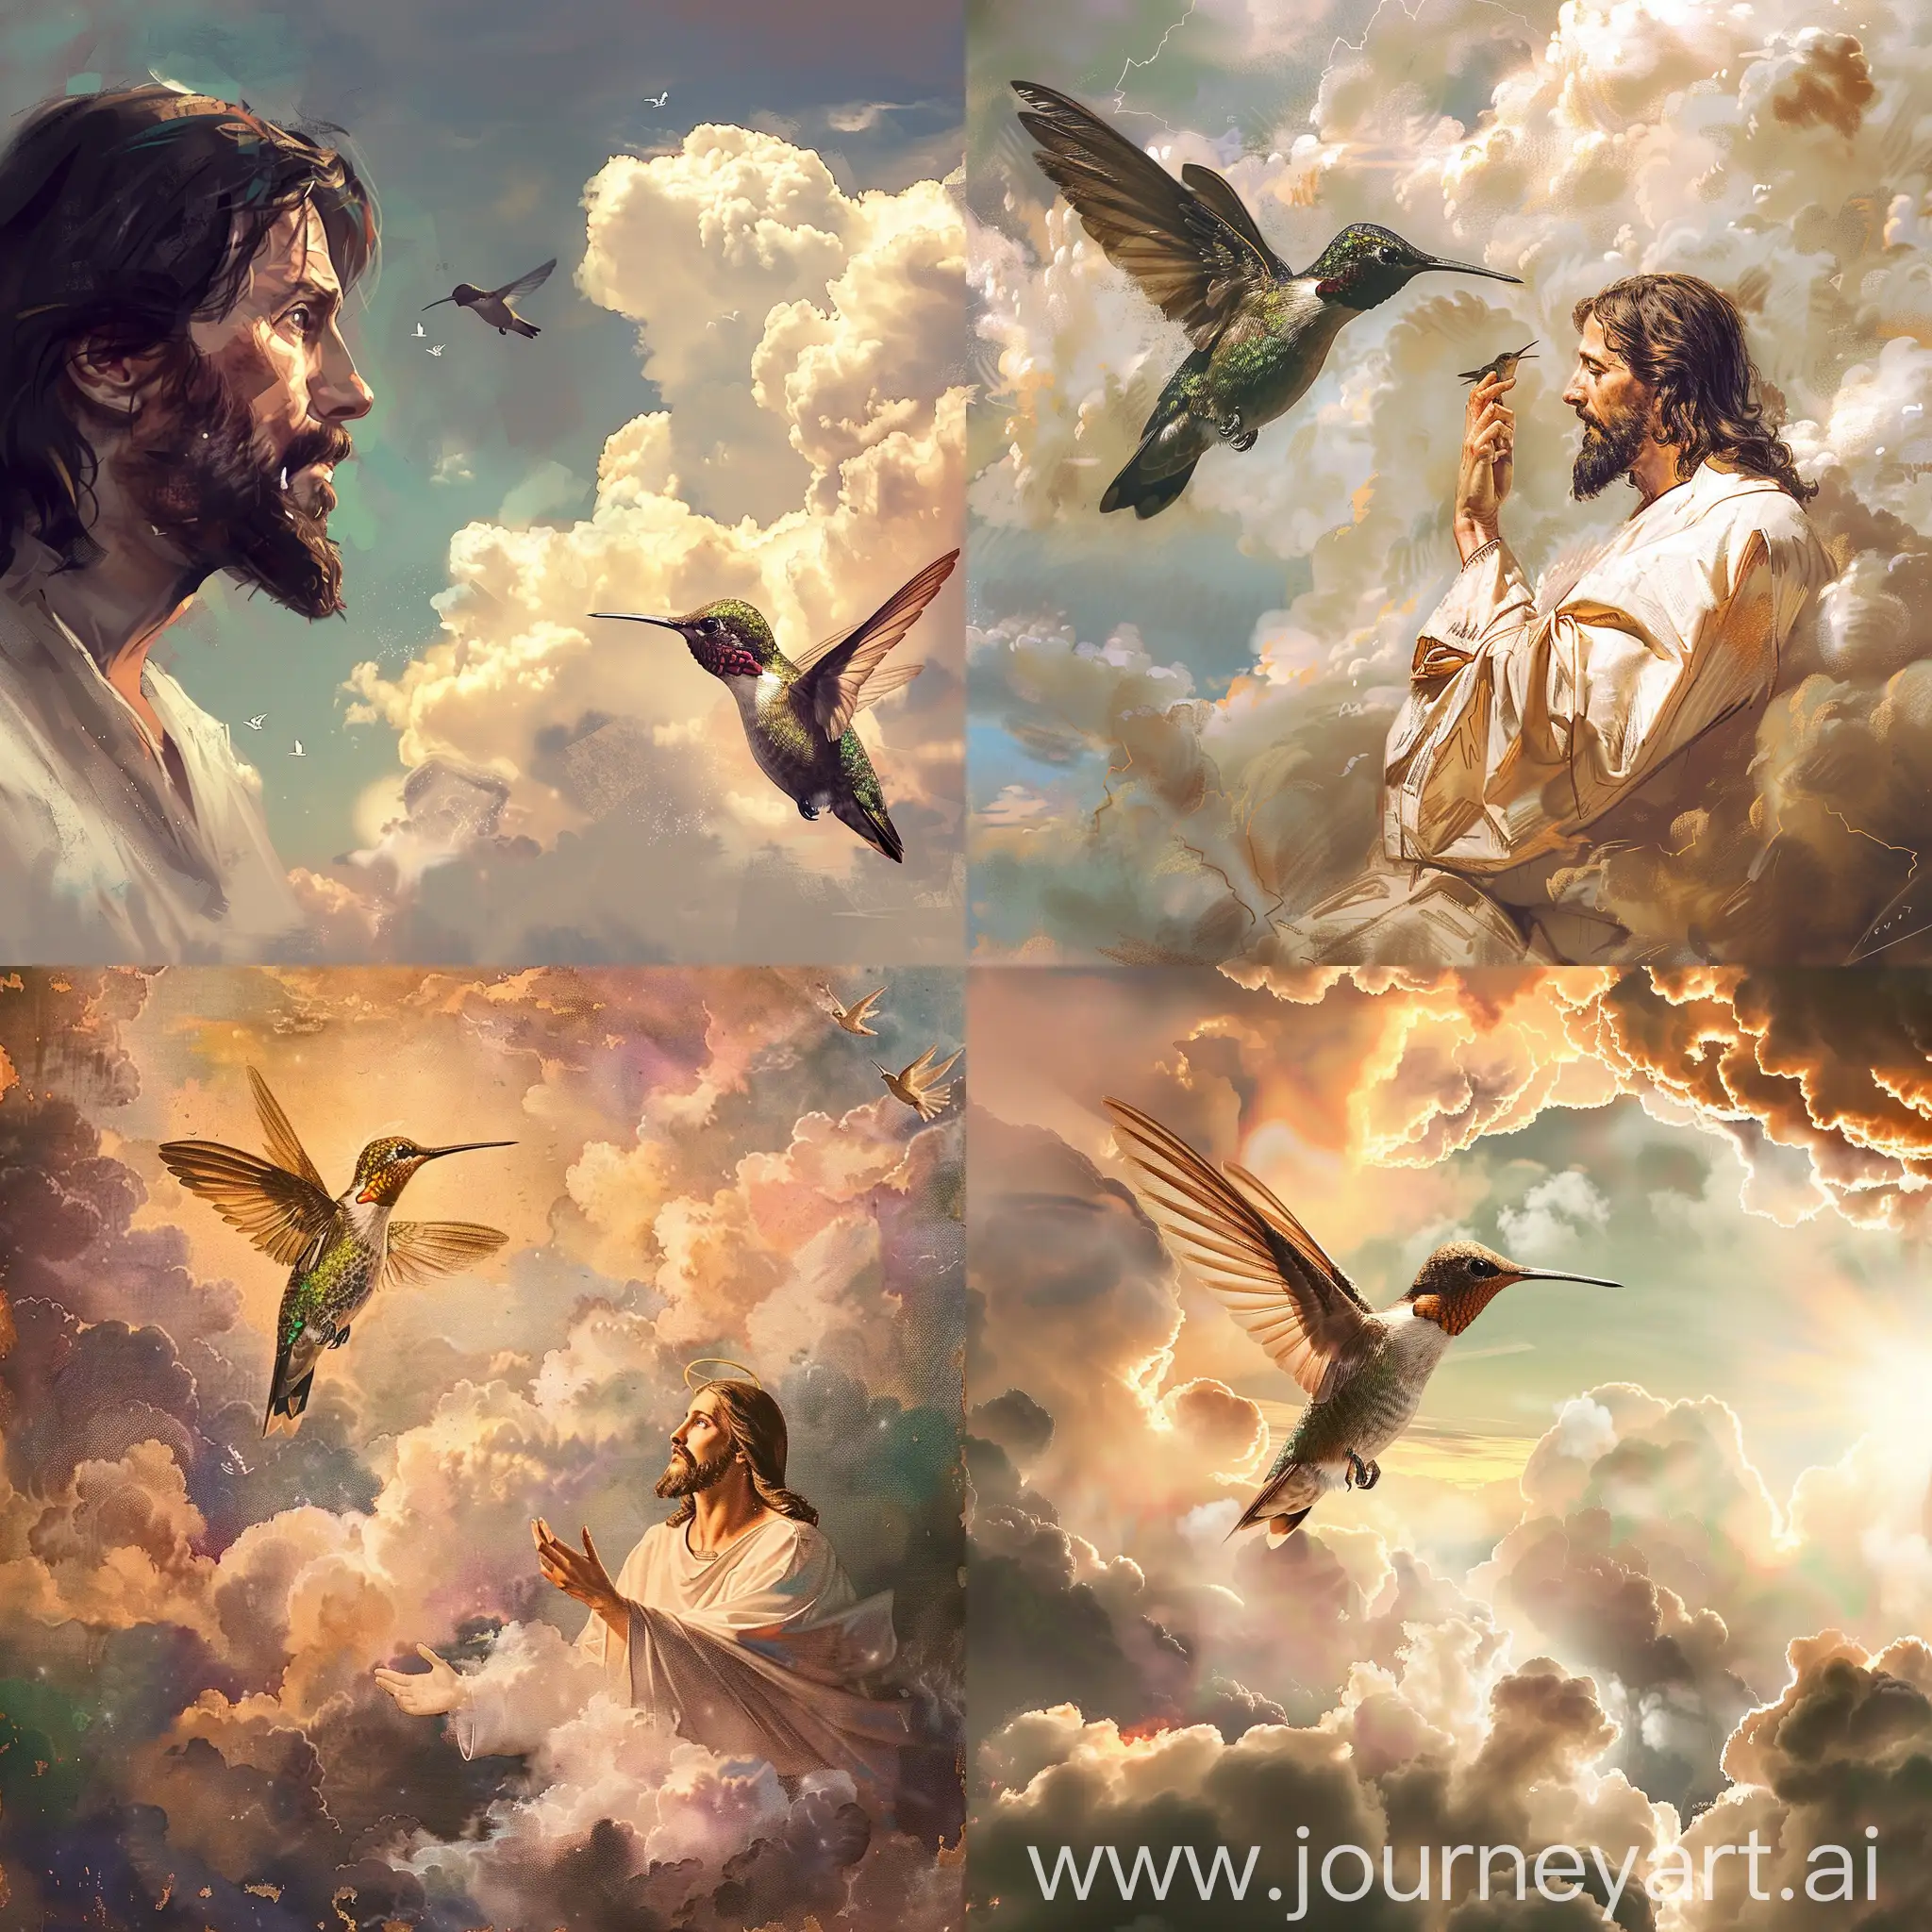 Humming bird flying in the clouds with Jesus